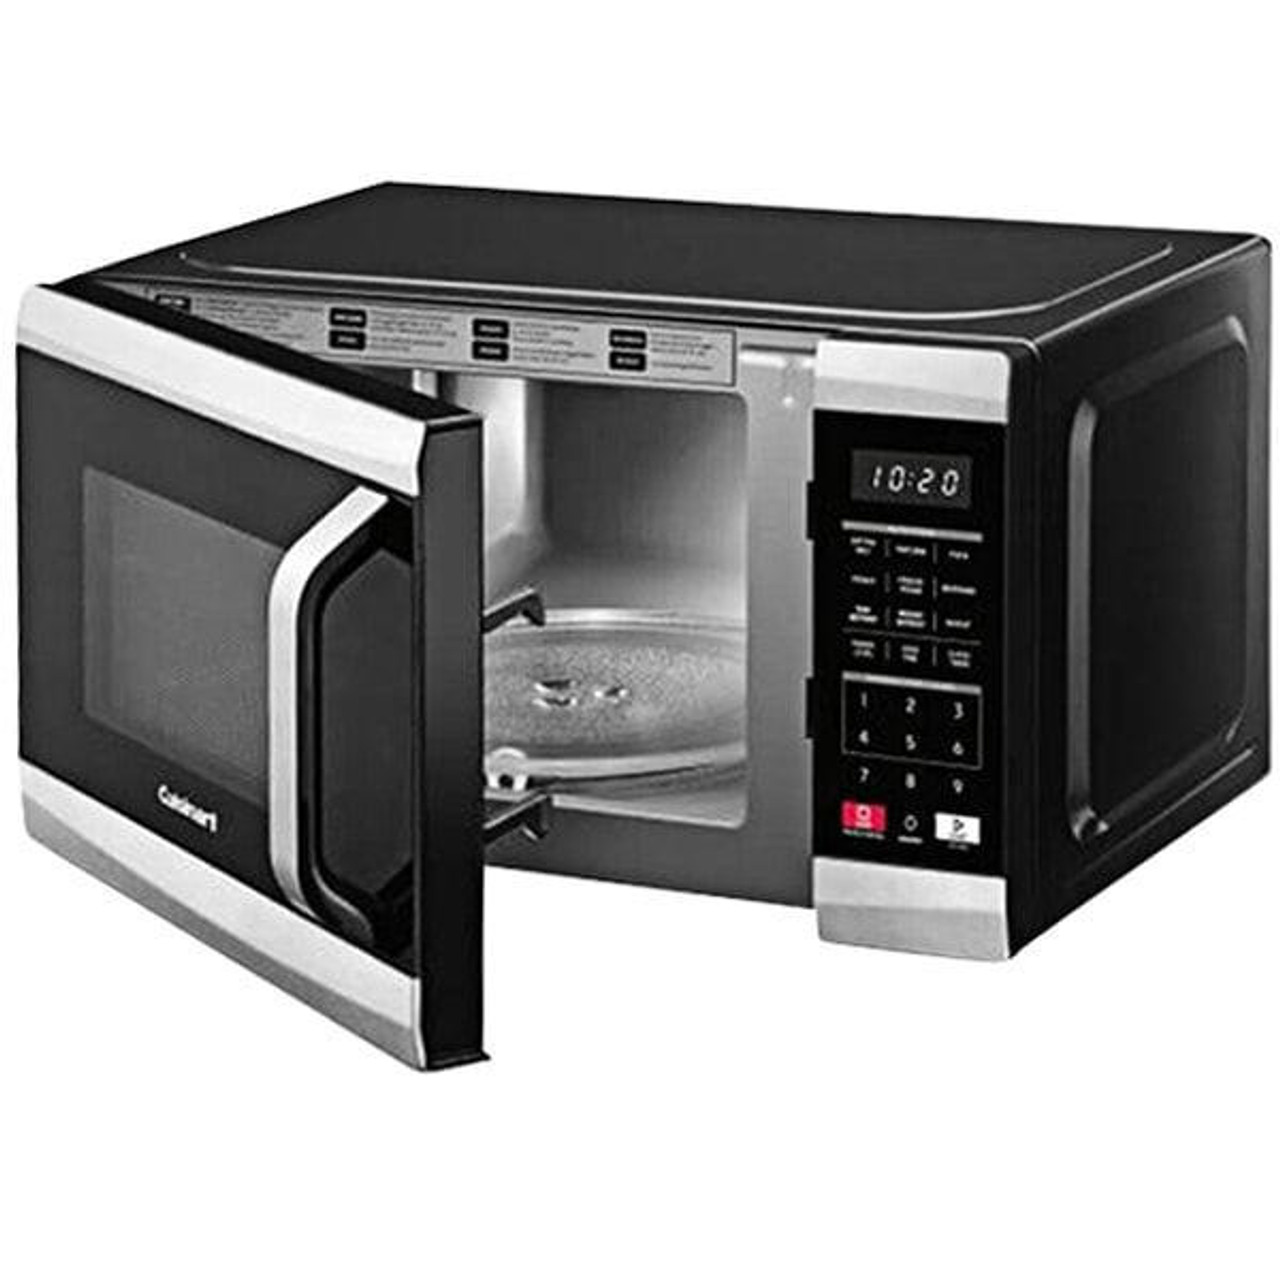 Cuisinart CMW-100 1 Cu. Ft. Stainless Microwave